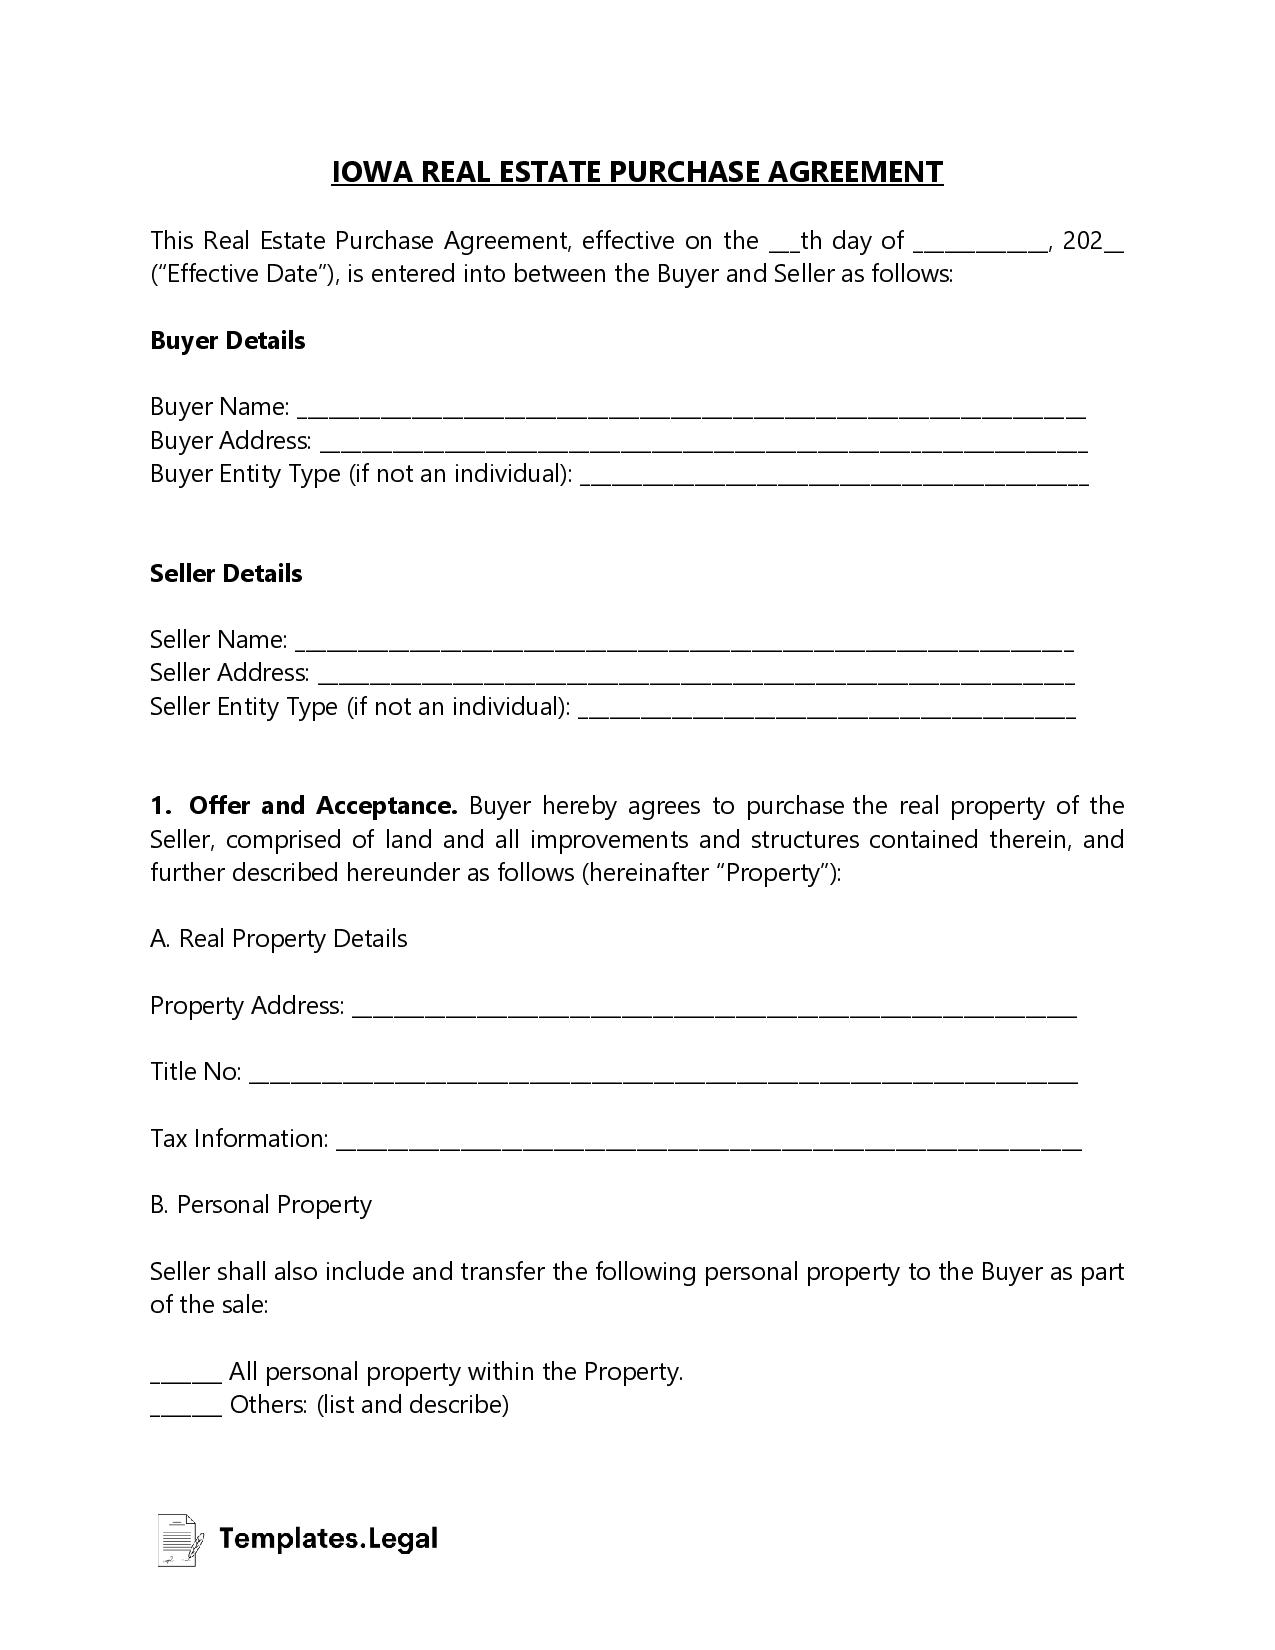 Iowa Real Estate Purchase Agreement - Templates.Legal